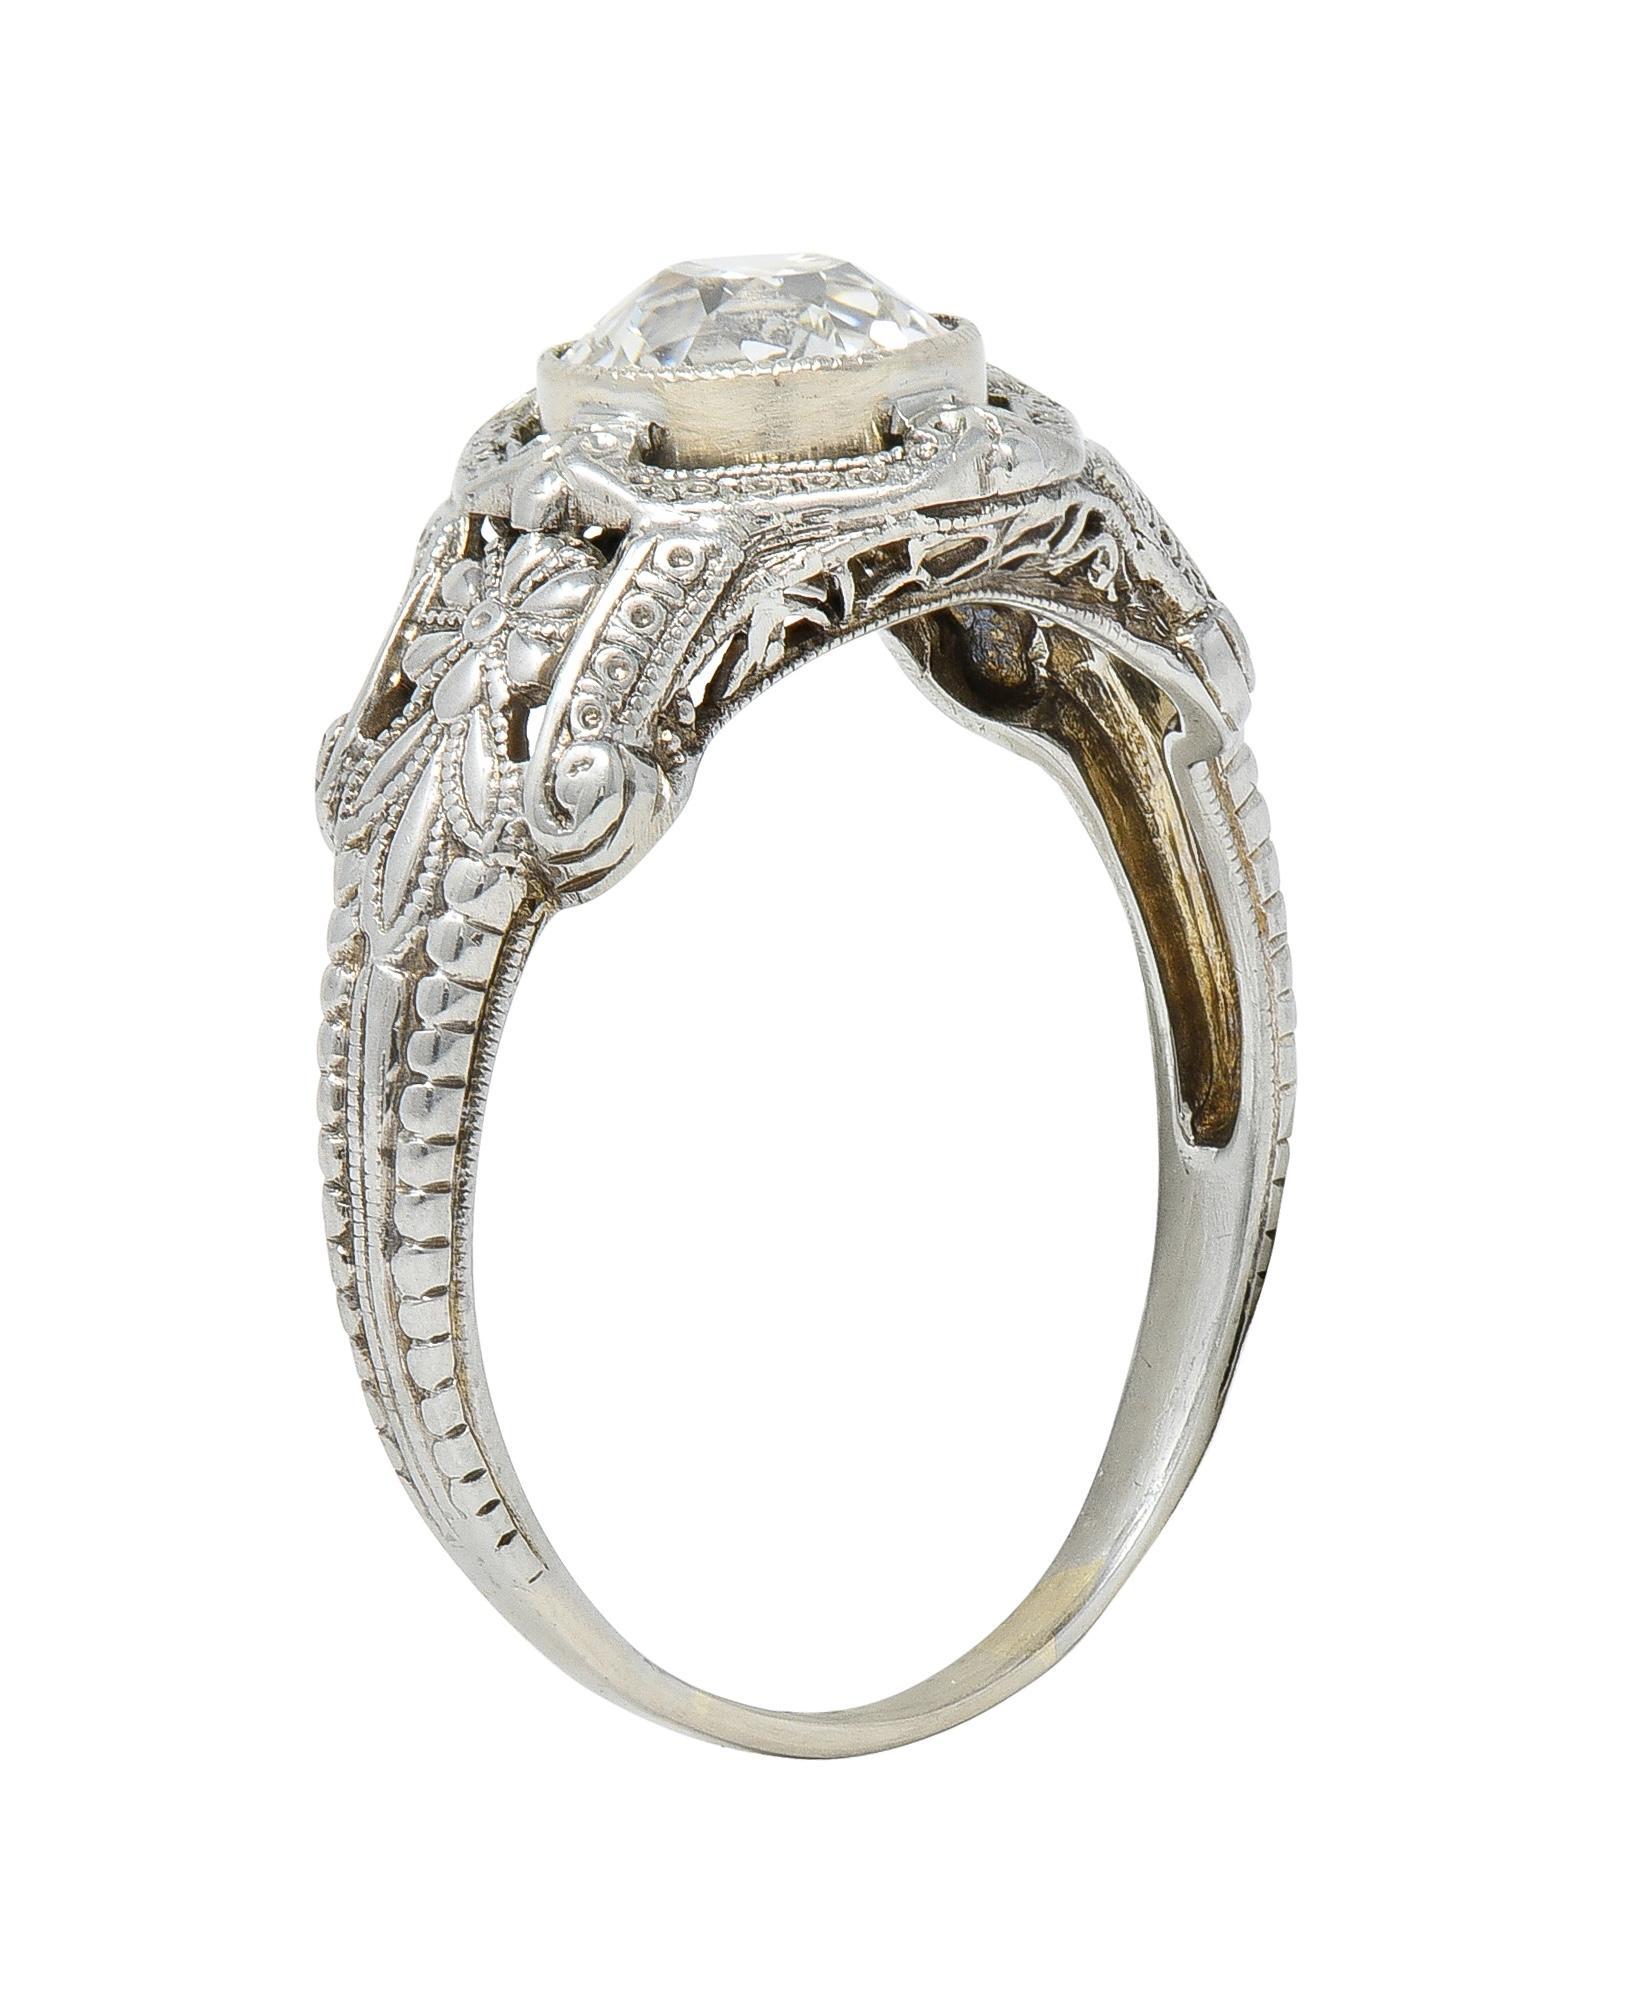 Centering a bezel set old European cut diamond weighing 1.19 carat total - J color with SI1 clarity
Accented by milgrain surround with decorative engraving
Flanked by floral motif shoulders
With pierced scrolling profile
Stamped 18k for 18 karat